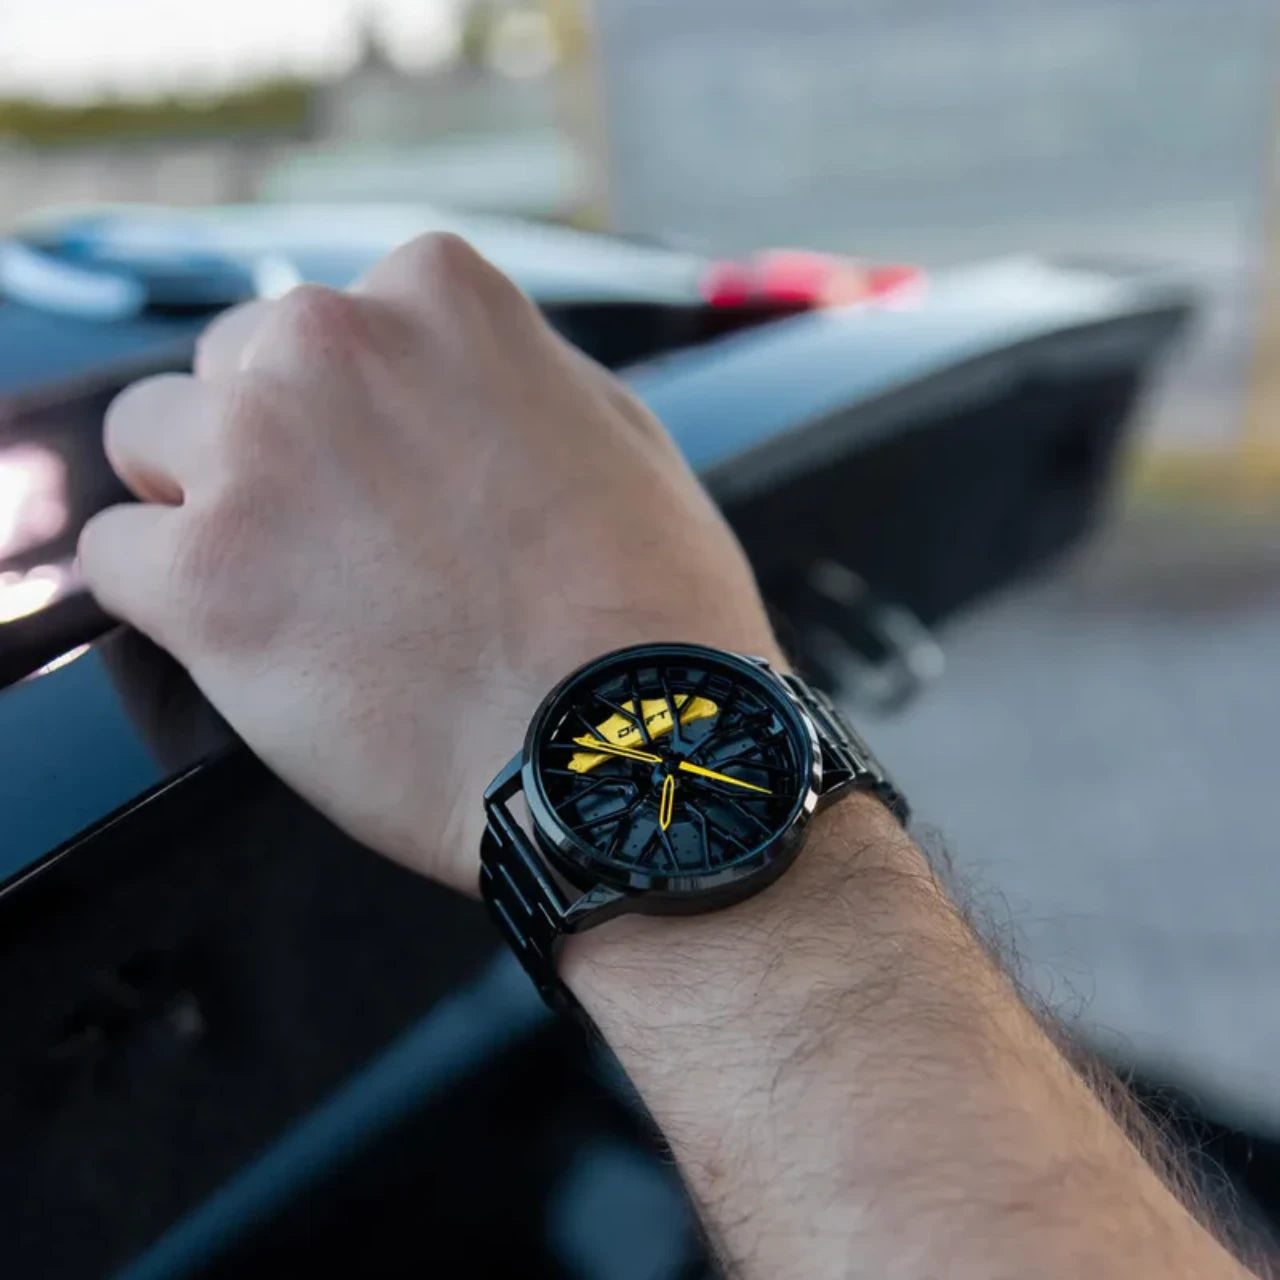 Elevate your style with our innovative yellow Motorsport Rim Watch. Crafted by a young German startup, these precision timepieces are designed for motorsport and tuning enthusiasts, as well as auto aficionados. Ignite your passion now! #id_46744363073866